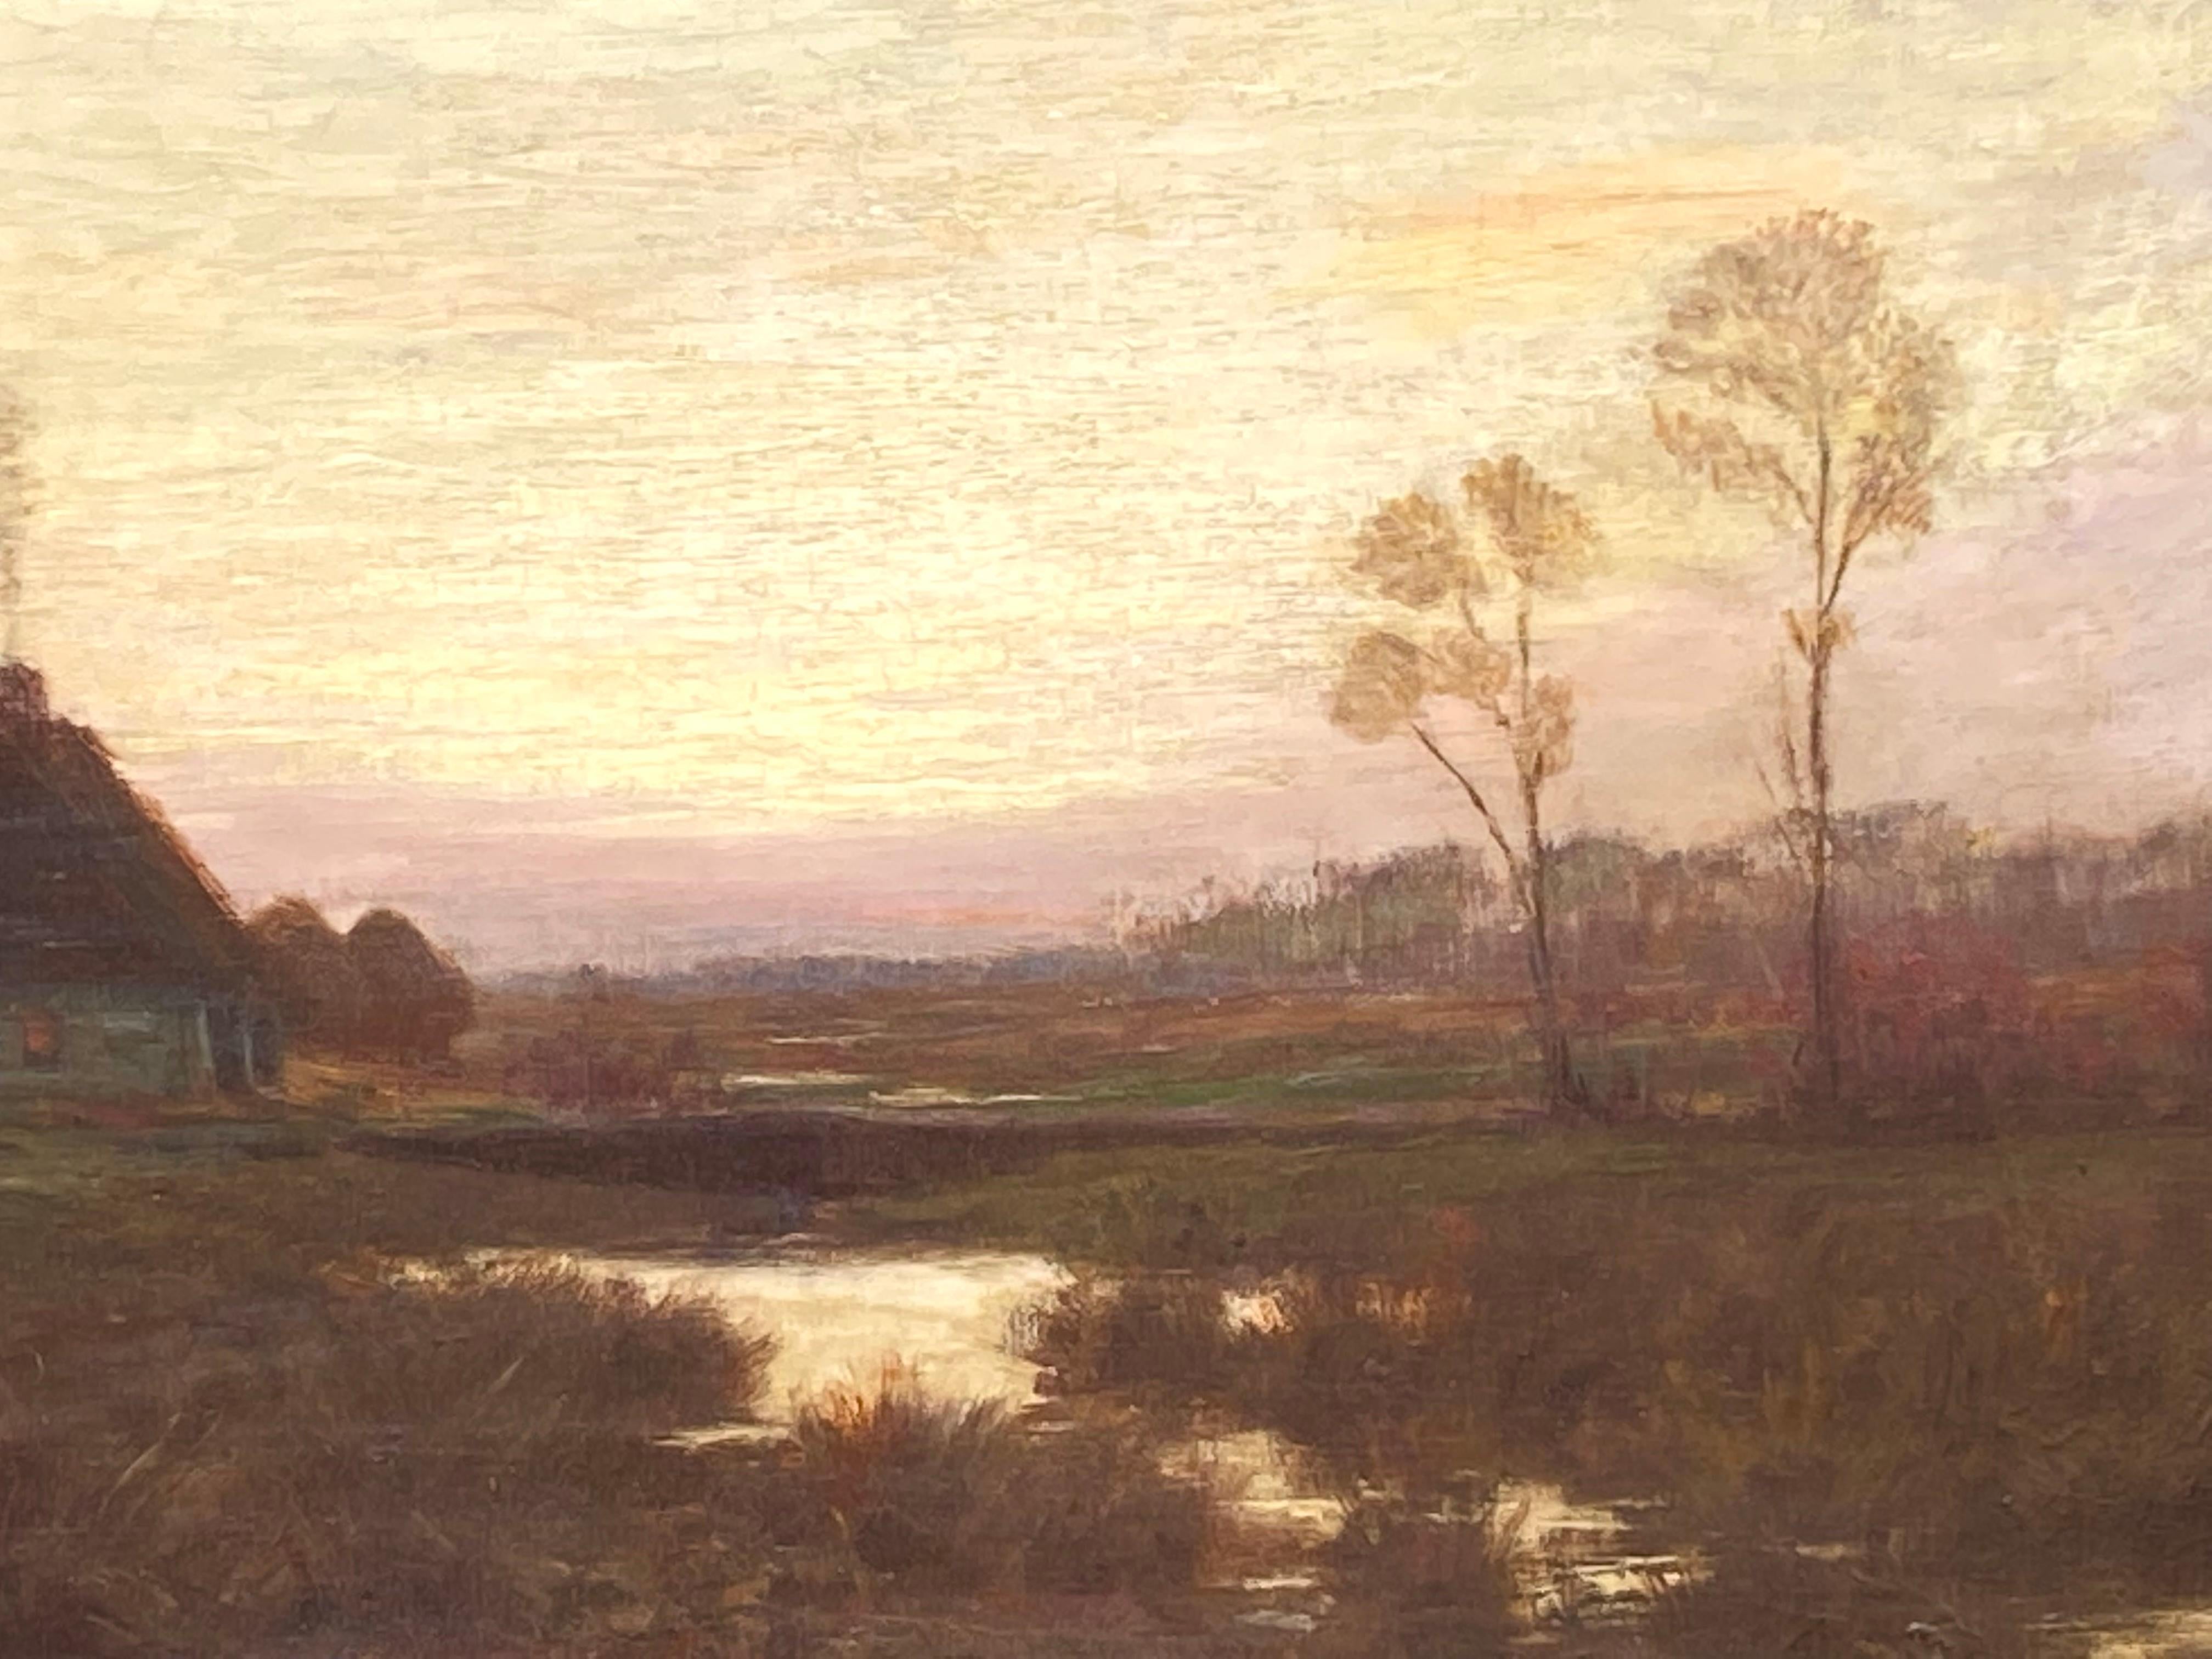 “Country Twilight” - Brown Landscape Painting by William Merritt Post